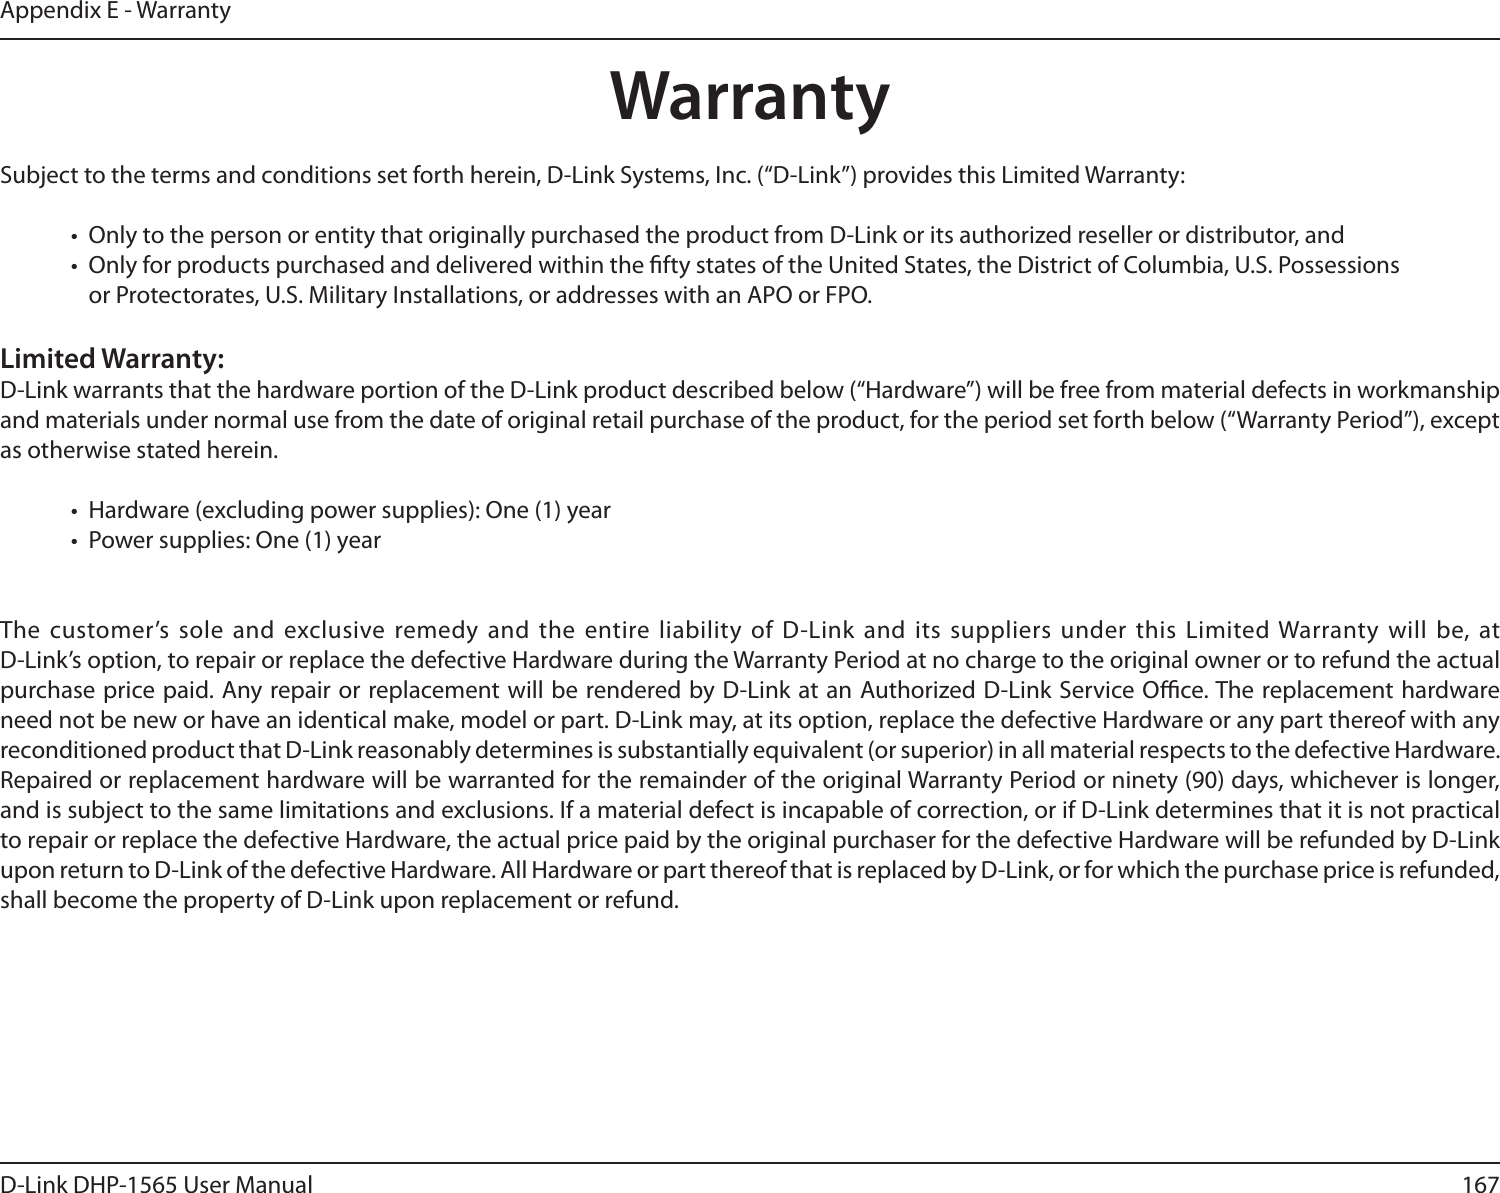 167D-Link DHP-1565 User ManualAppendix E - WarrantyWarrantySubject to the terms and conditions set forth herein, D-Link Systems, Inc. (“D-Link”) provides this Limited Warranty:•  Only to the person or entity that originally purchased the product from D-Link or its authorized reseller or distributor, and•  Only for products purchased and delivered within the fty states of the United States, the District of Columbia, U.S. Possessions       or Protectorates, U.S. Military Installations, or addresses with an APO or FPO.Limited Warranty:D-Link warrants that the hardware portion of the D-Link product described below (“Hardware”) will be free from material defects in workmanship and materials under normal use from the date of original retail purchase of the product, for the period set forth below (“Warranty Period”), except as otherwise stated herein.•  Hardware (excluding power supplies): One (1) year•  Power supplies: One (1) yearThe customer’s sole and exclusive remedy and the entire liability of D-Link and its suppliers under this Limited Warranty will be, at  D-Link’s option, to repair or replace the defective Hardware during the Warranty Period at no charge to the original owner or to refund the actual purchase price paid. Any repair or replacement will be rendered by D-Link at an Authorized D-Link Service Oce. The replacement hardware need not be new or have an identical make, model or part. D-Link may, at its option, replace the defective Hardware or any part thereof with any reconditioned product that D-Link reasonably determines is substantially equivalent (or superior) in all material respects to the defective Hardware. Repaired or replacement hardware will be warranted for the remainder of the original Warranty Period or ninety (90) days, whichever is longer, and is subject to the same limitations and exclusions. If a material defect is incapable of correction, or if D-Link determines that it is not practical to repair or replace the defective Hardware, the actual price paid by the original purchaser for the defective Hardware will be refunded by D-Link upon return to D-Link of the defective Hardware. All Hardware or part thereof that is replaced by D-Link, or for which the purchase price is refunded, shall become the property of D-Link upon replacement or refund.